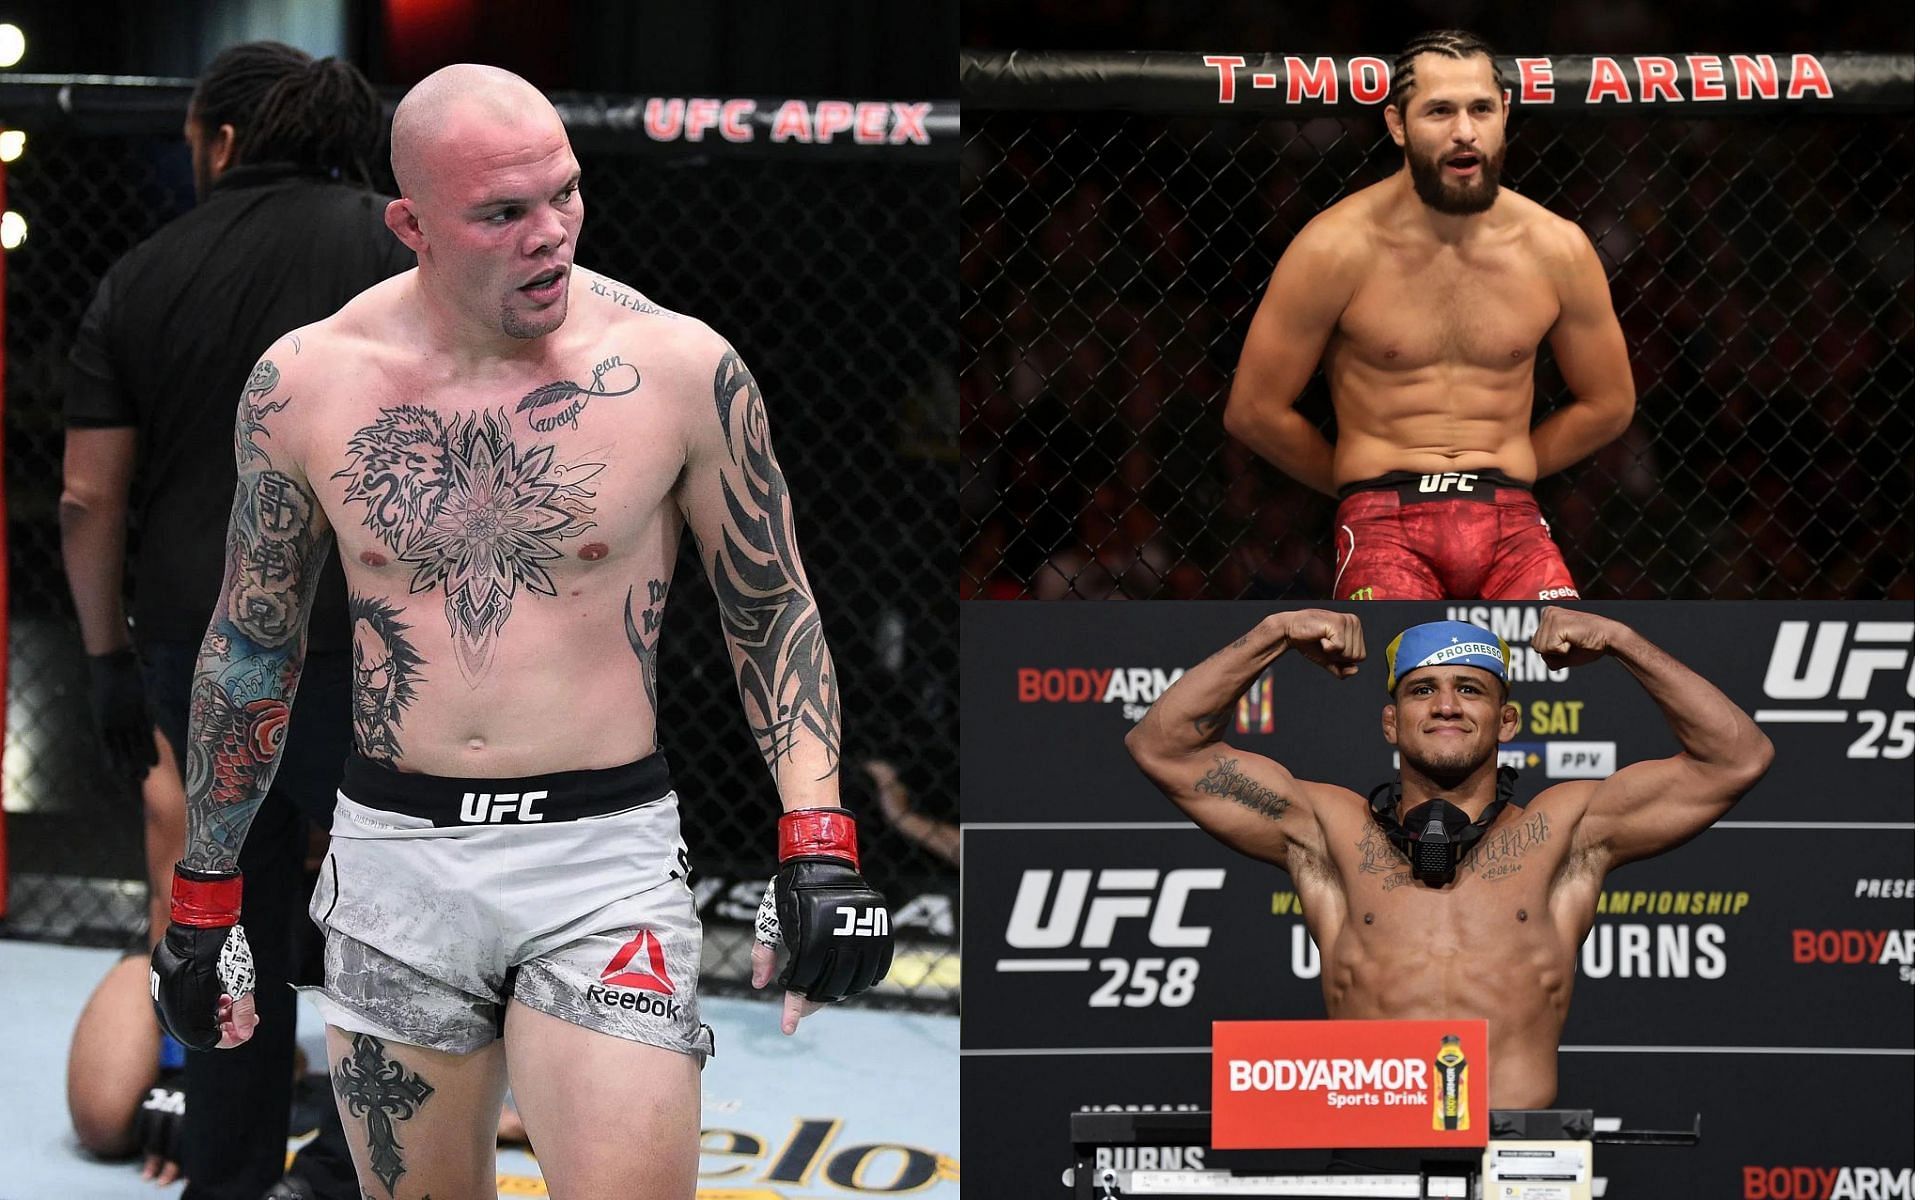 Anthony Smith (left), Jorge Masvidal (top right), and Gilbert Burns (bottom right) [Images courtesy of Getty]